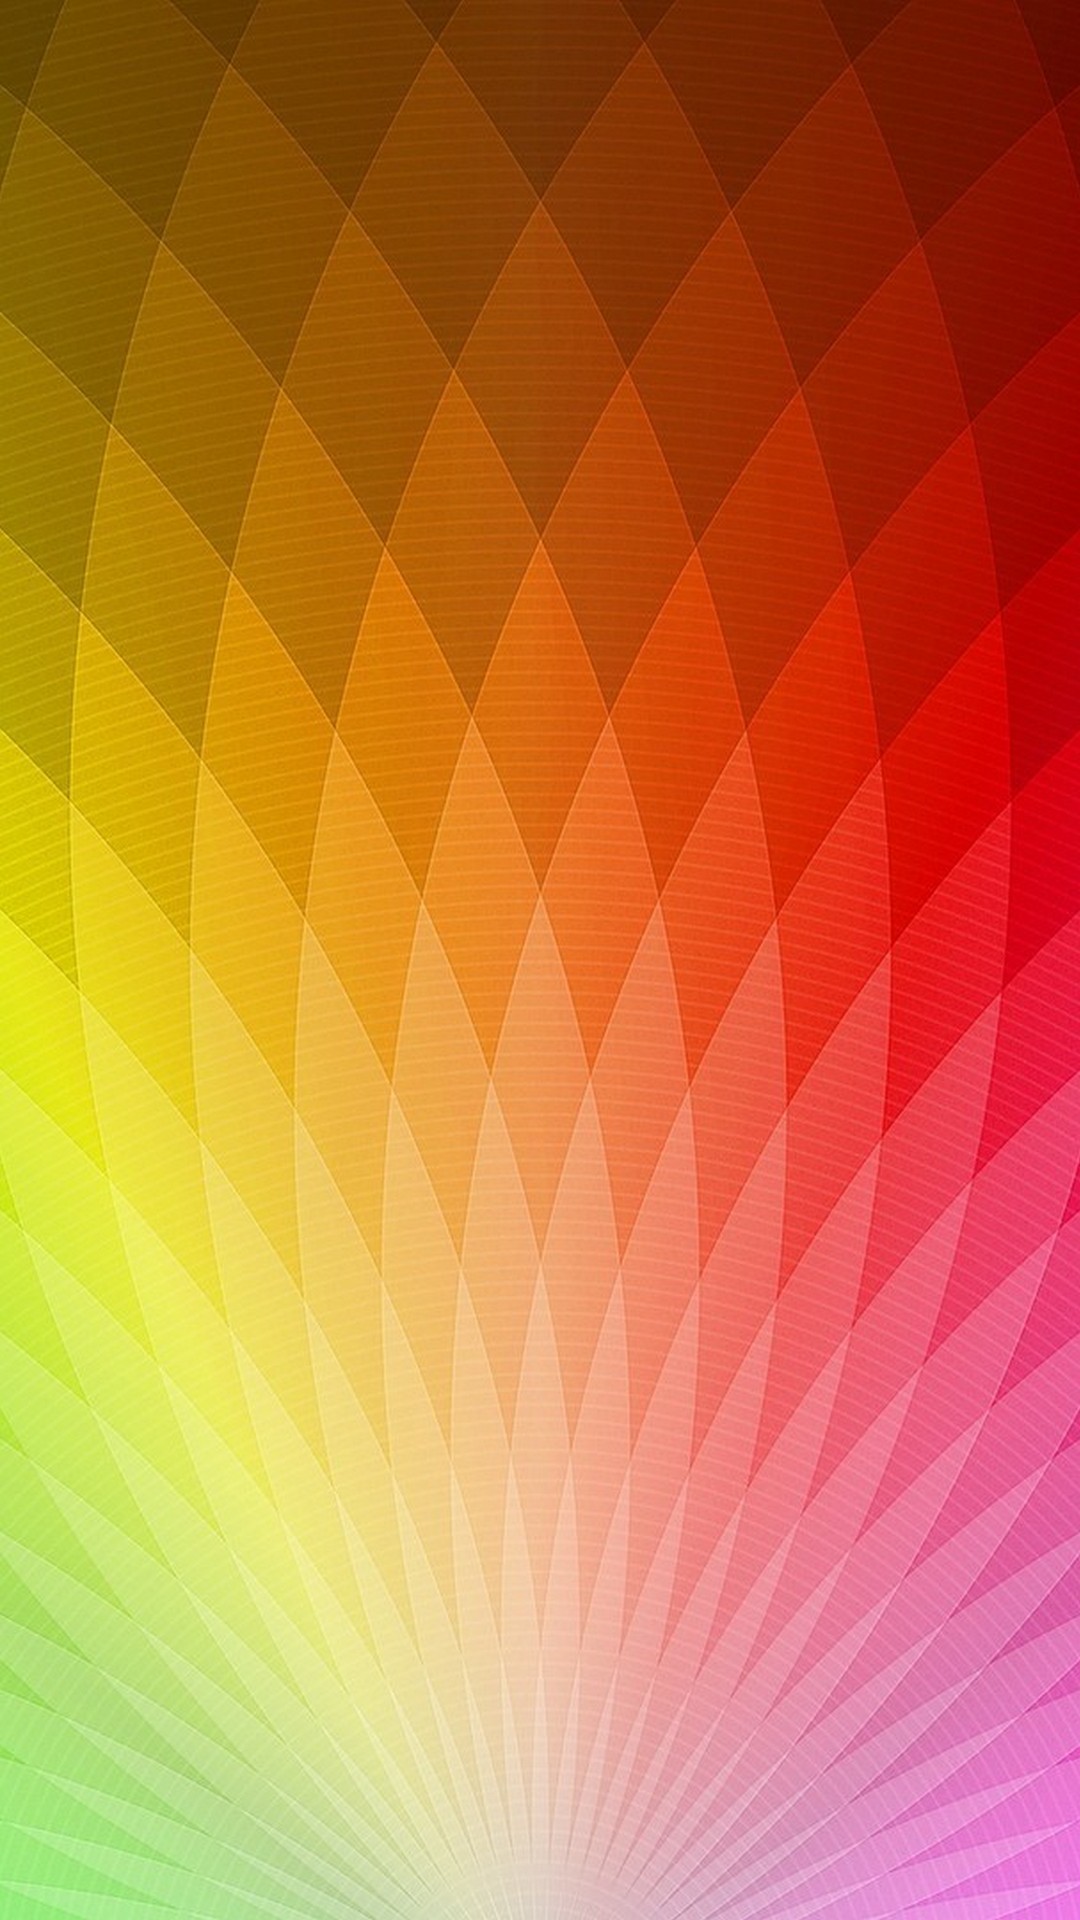 Rainbow Wallpaper iPhone HD with image resolution 1080x1920 pixel. You can use this wallpaper as background for your desktop Computer Screensavers, Android or iPhone smartphones